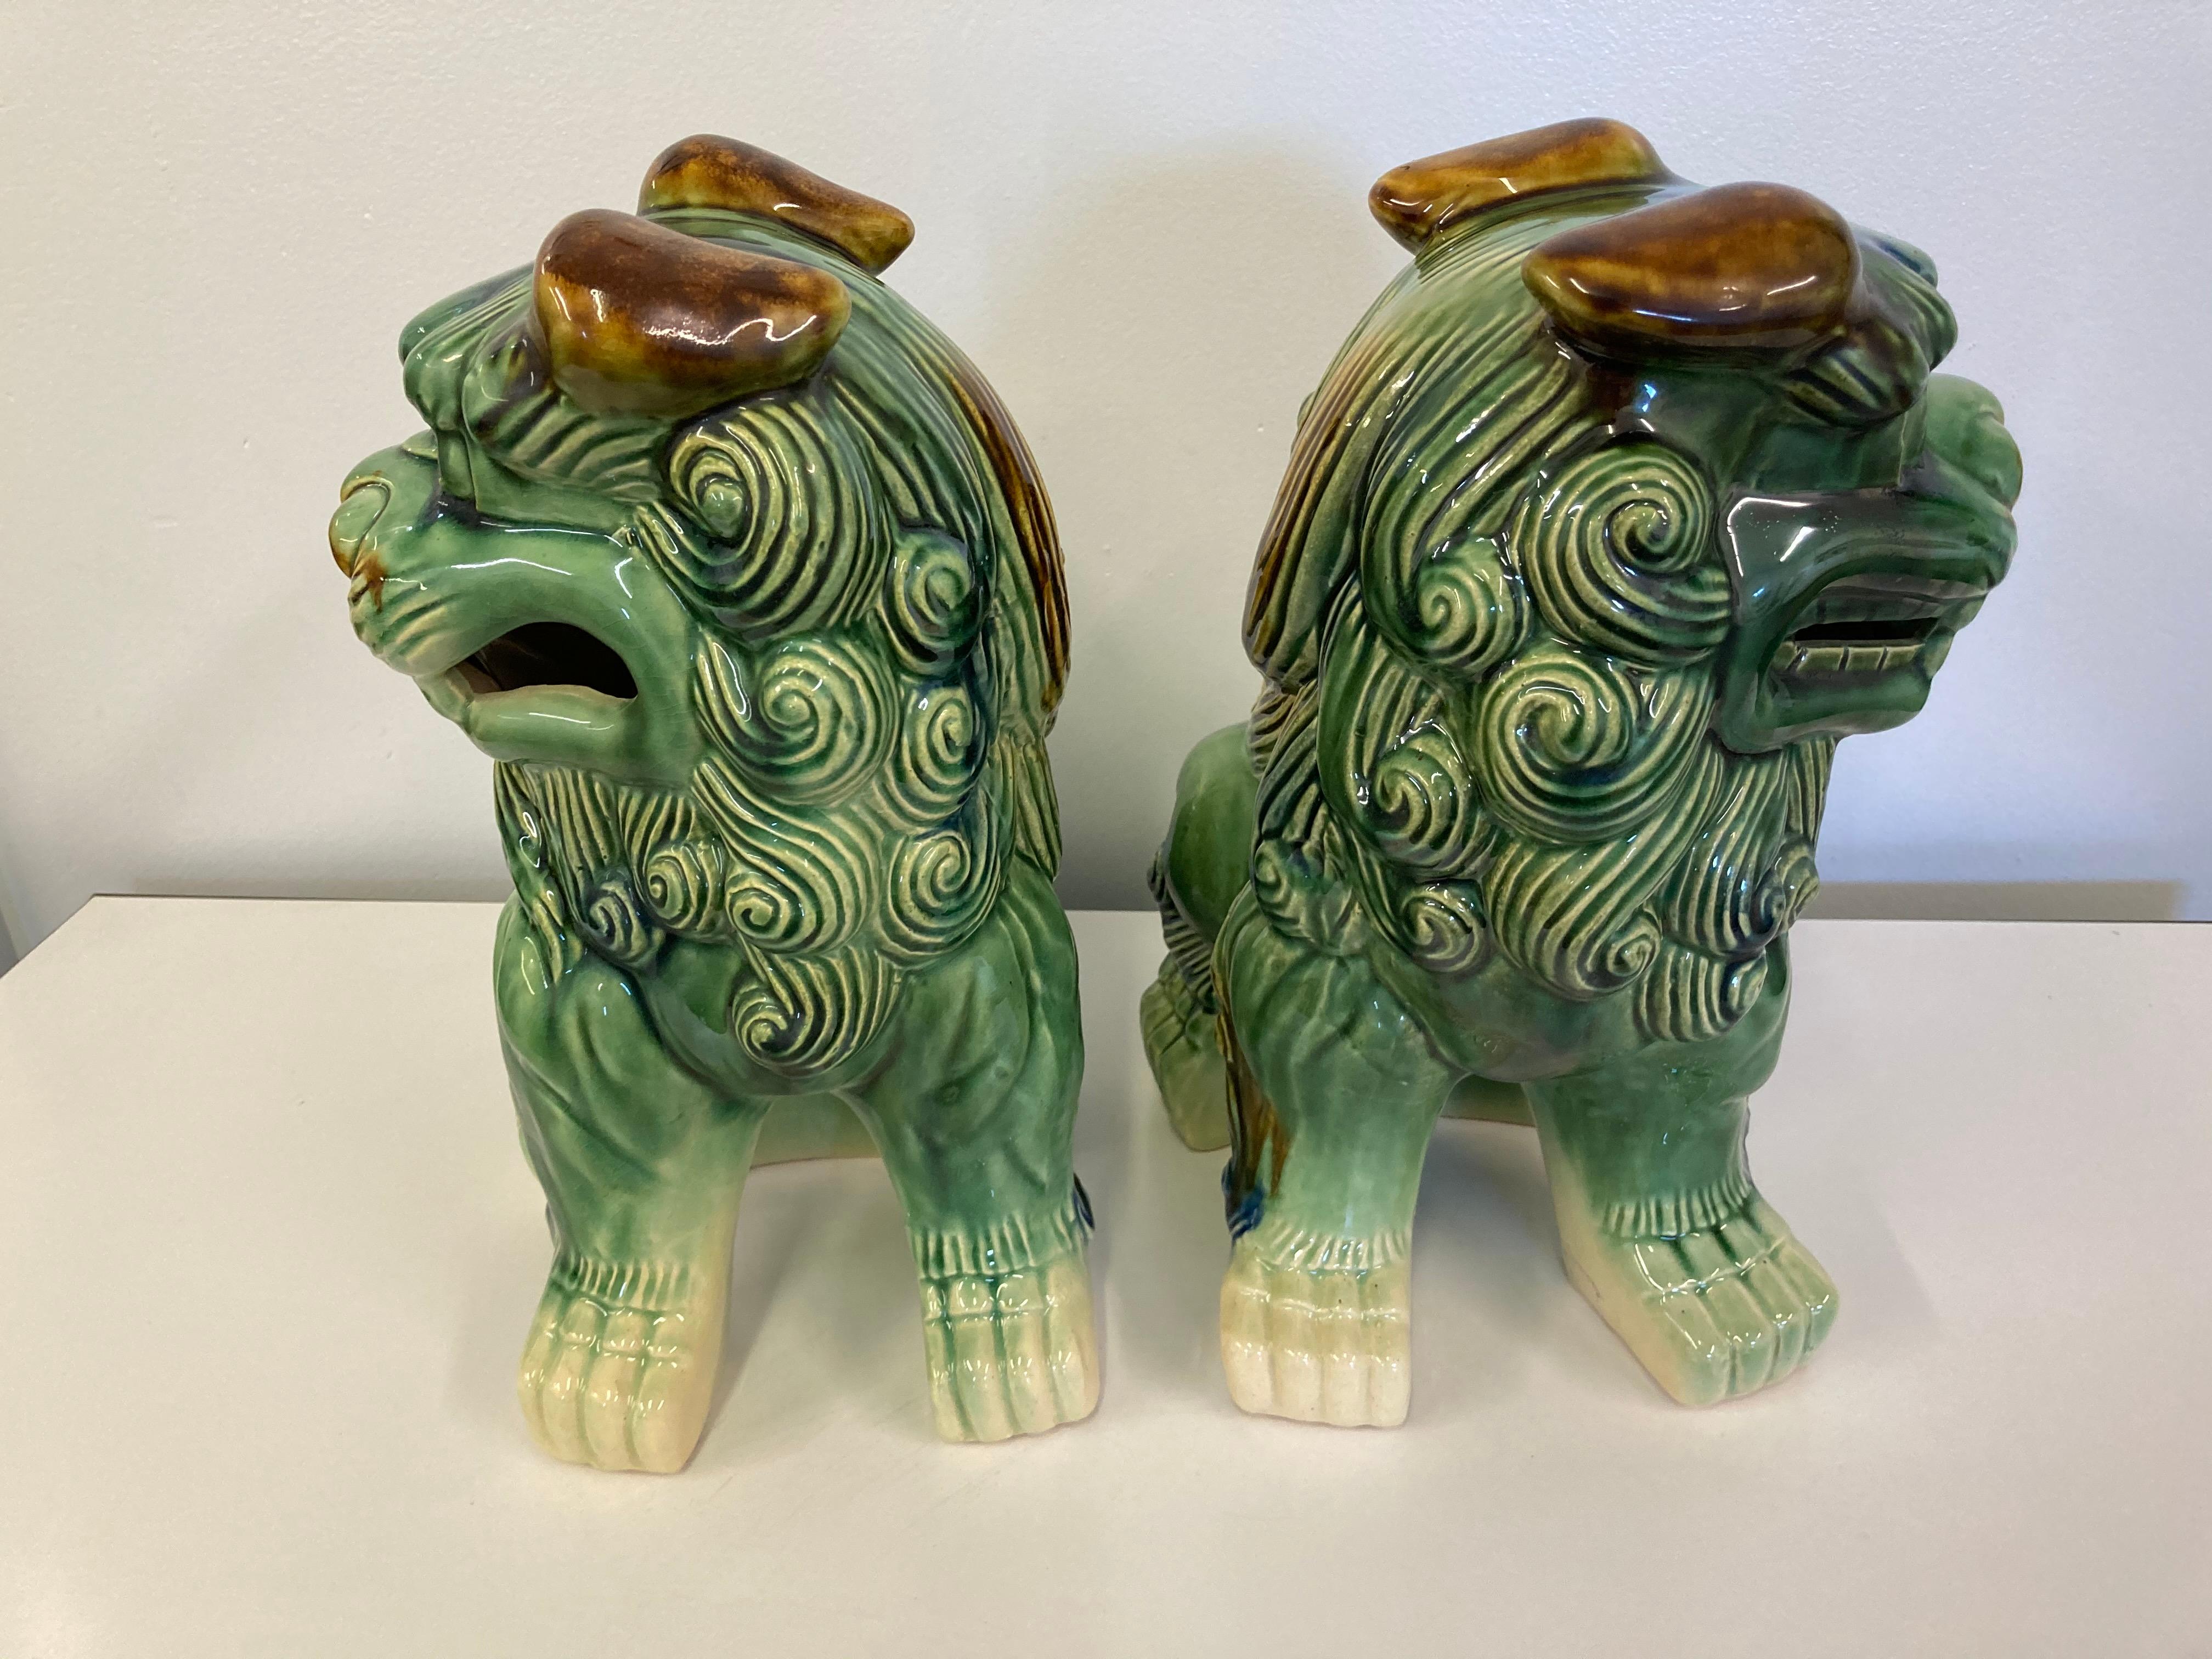 Ming Pair of Vintage/Antique Chinese Porcelain Glazed Foo Dogs Temple Guardians